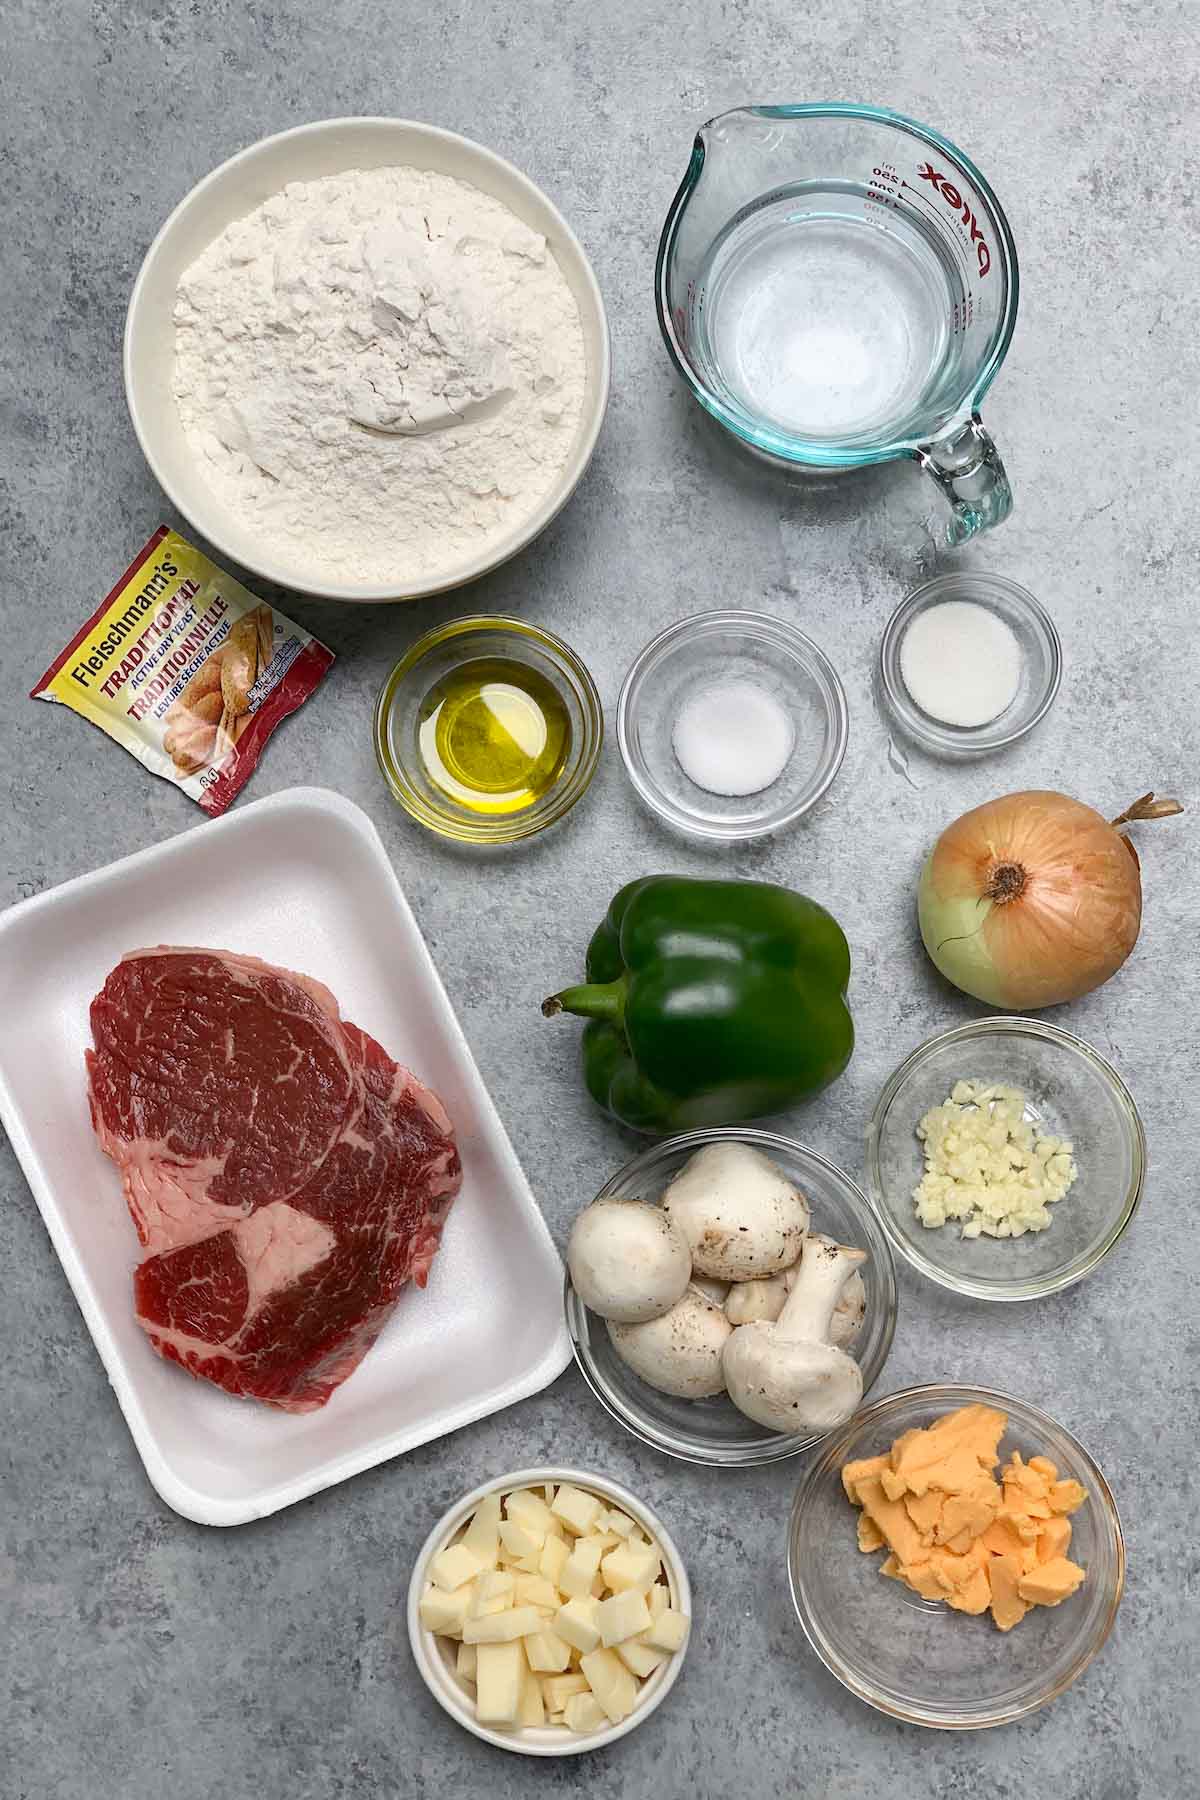 Ingredients for making homemade Domino's Philly Cheese Steak Pizza